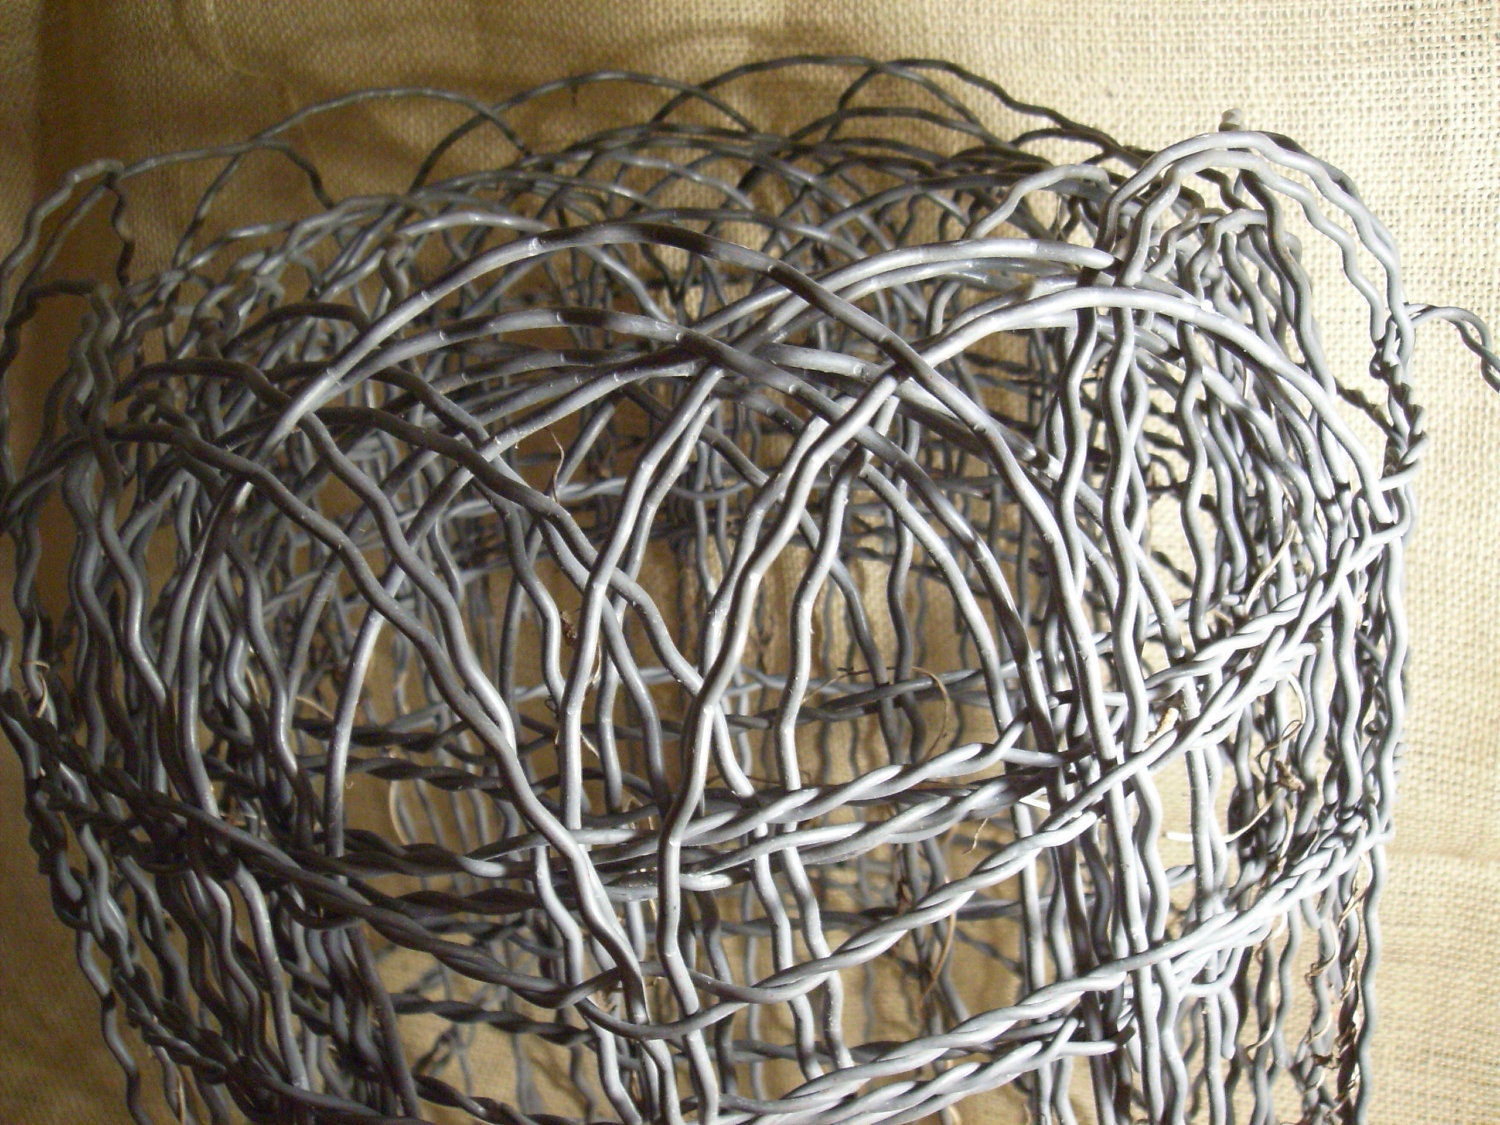 15 ft of crimped curly wire garden fence SO MANY IDEAS